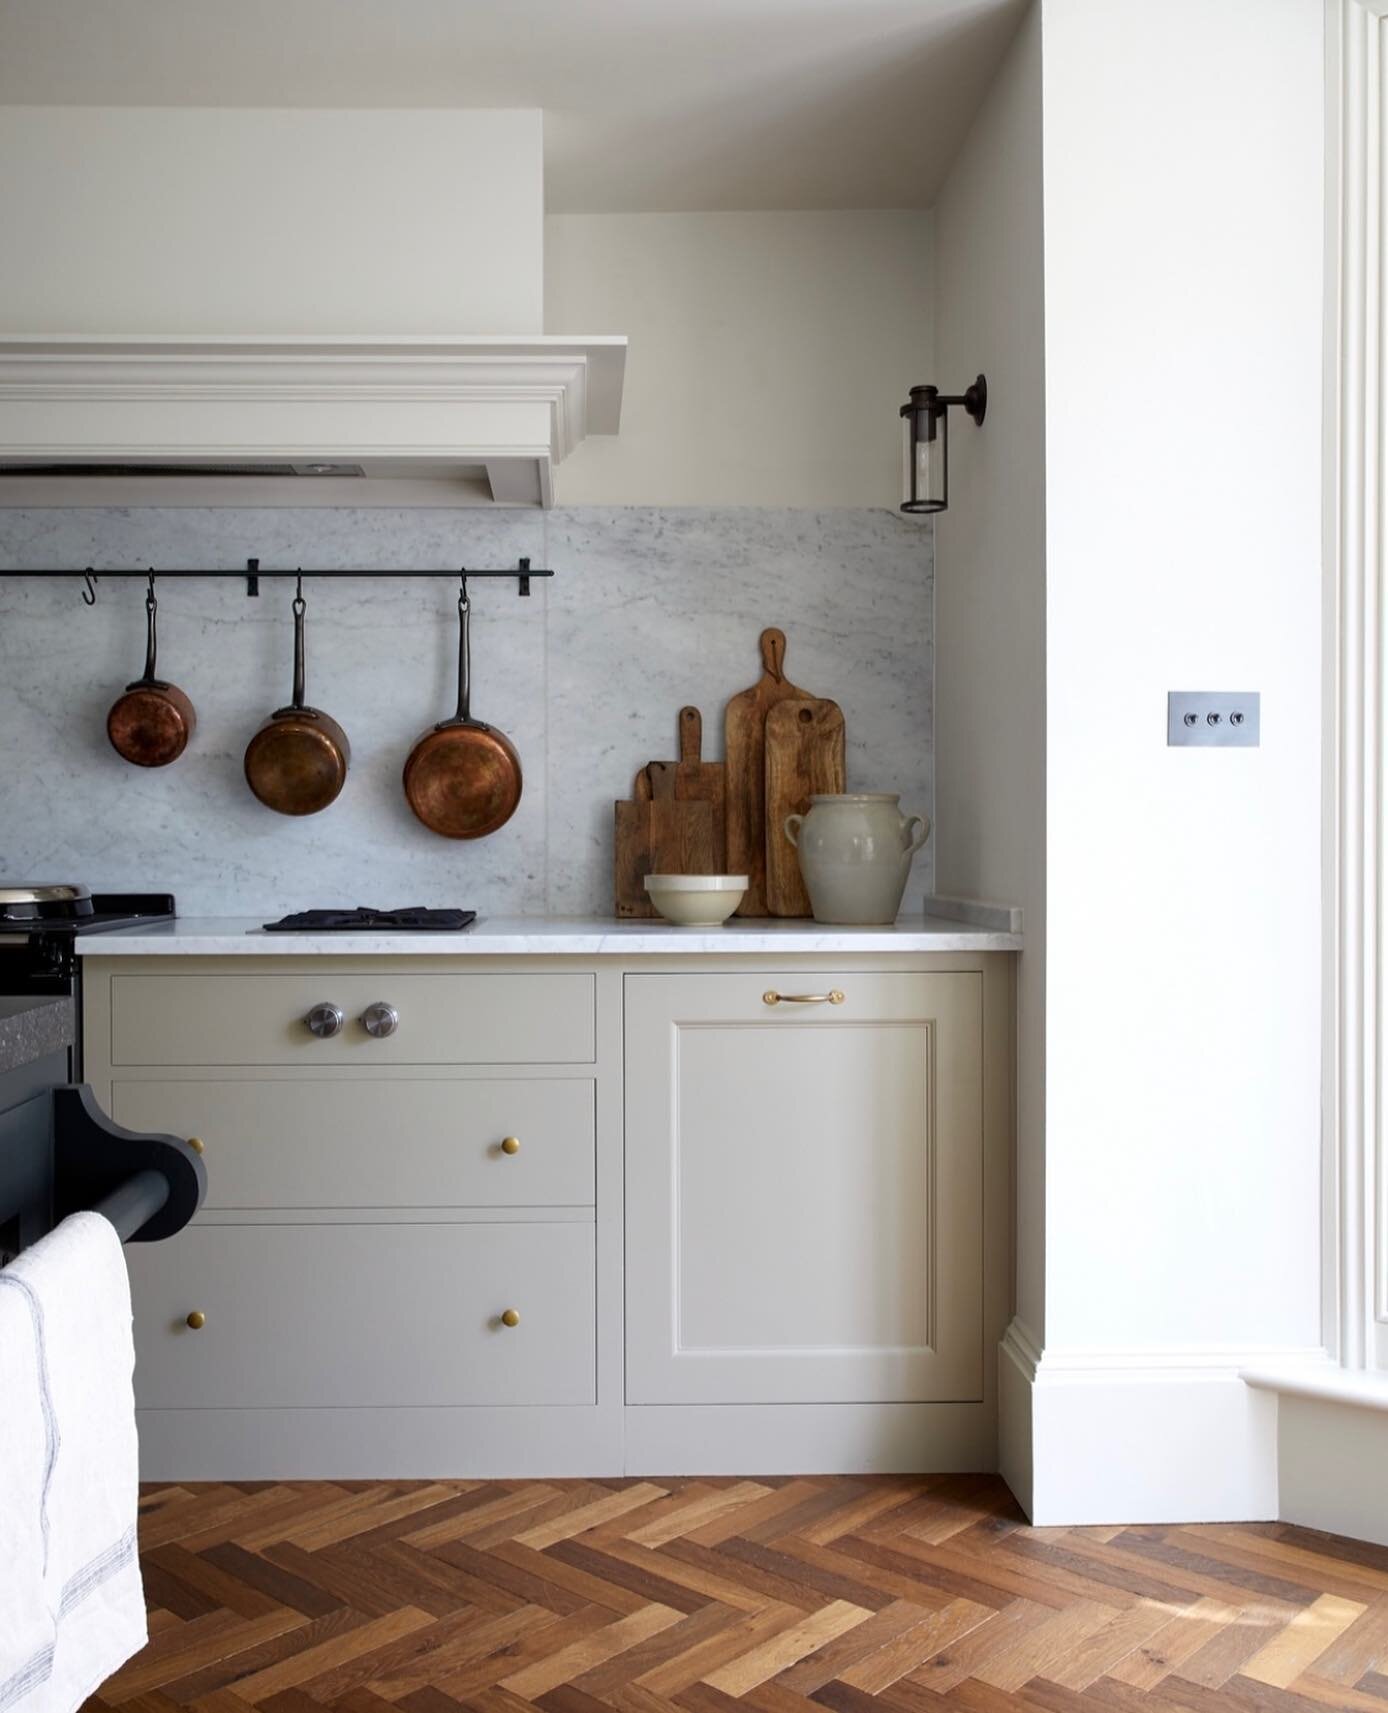 A favourite corner of the kitchen from our Hove project. A stunning oak floor from @solidfloor and exquisite cabinetry from @plainenglishdesign make for a beautiful and simplistic design that will stand the test of time. The bronze wall light from @j